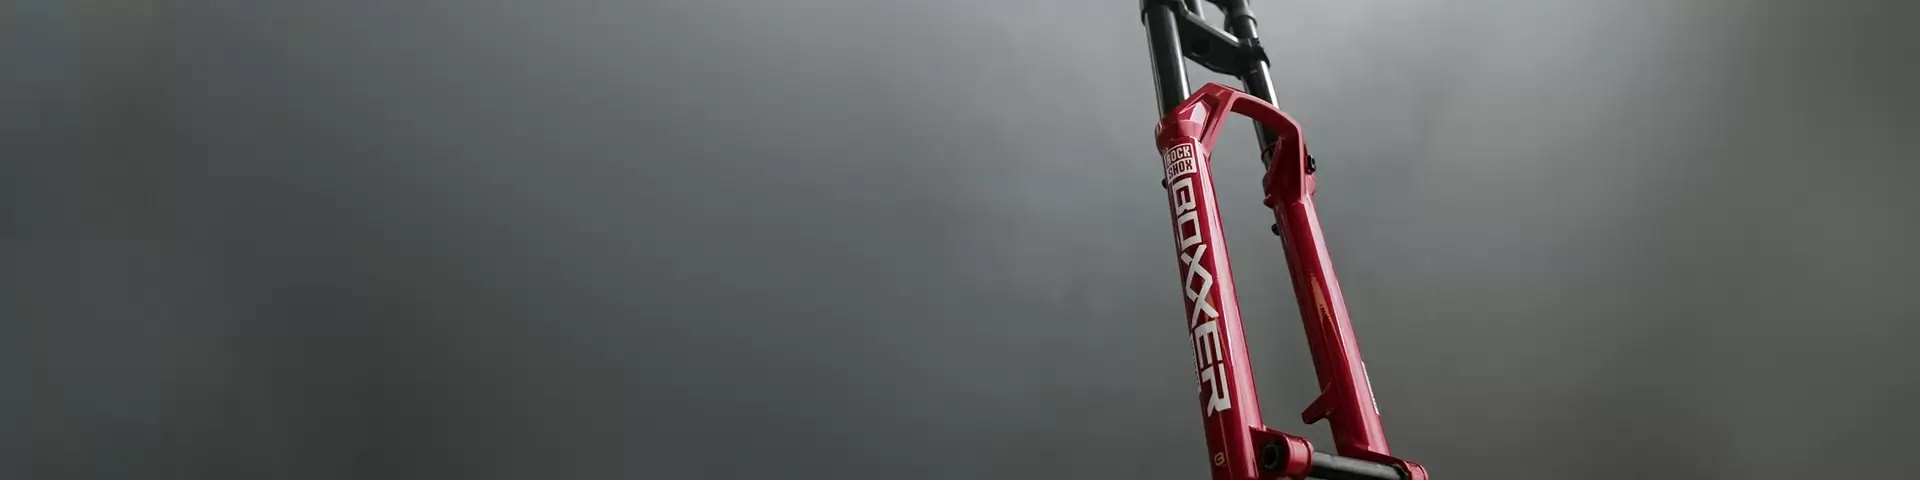 Cyclocross Forks